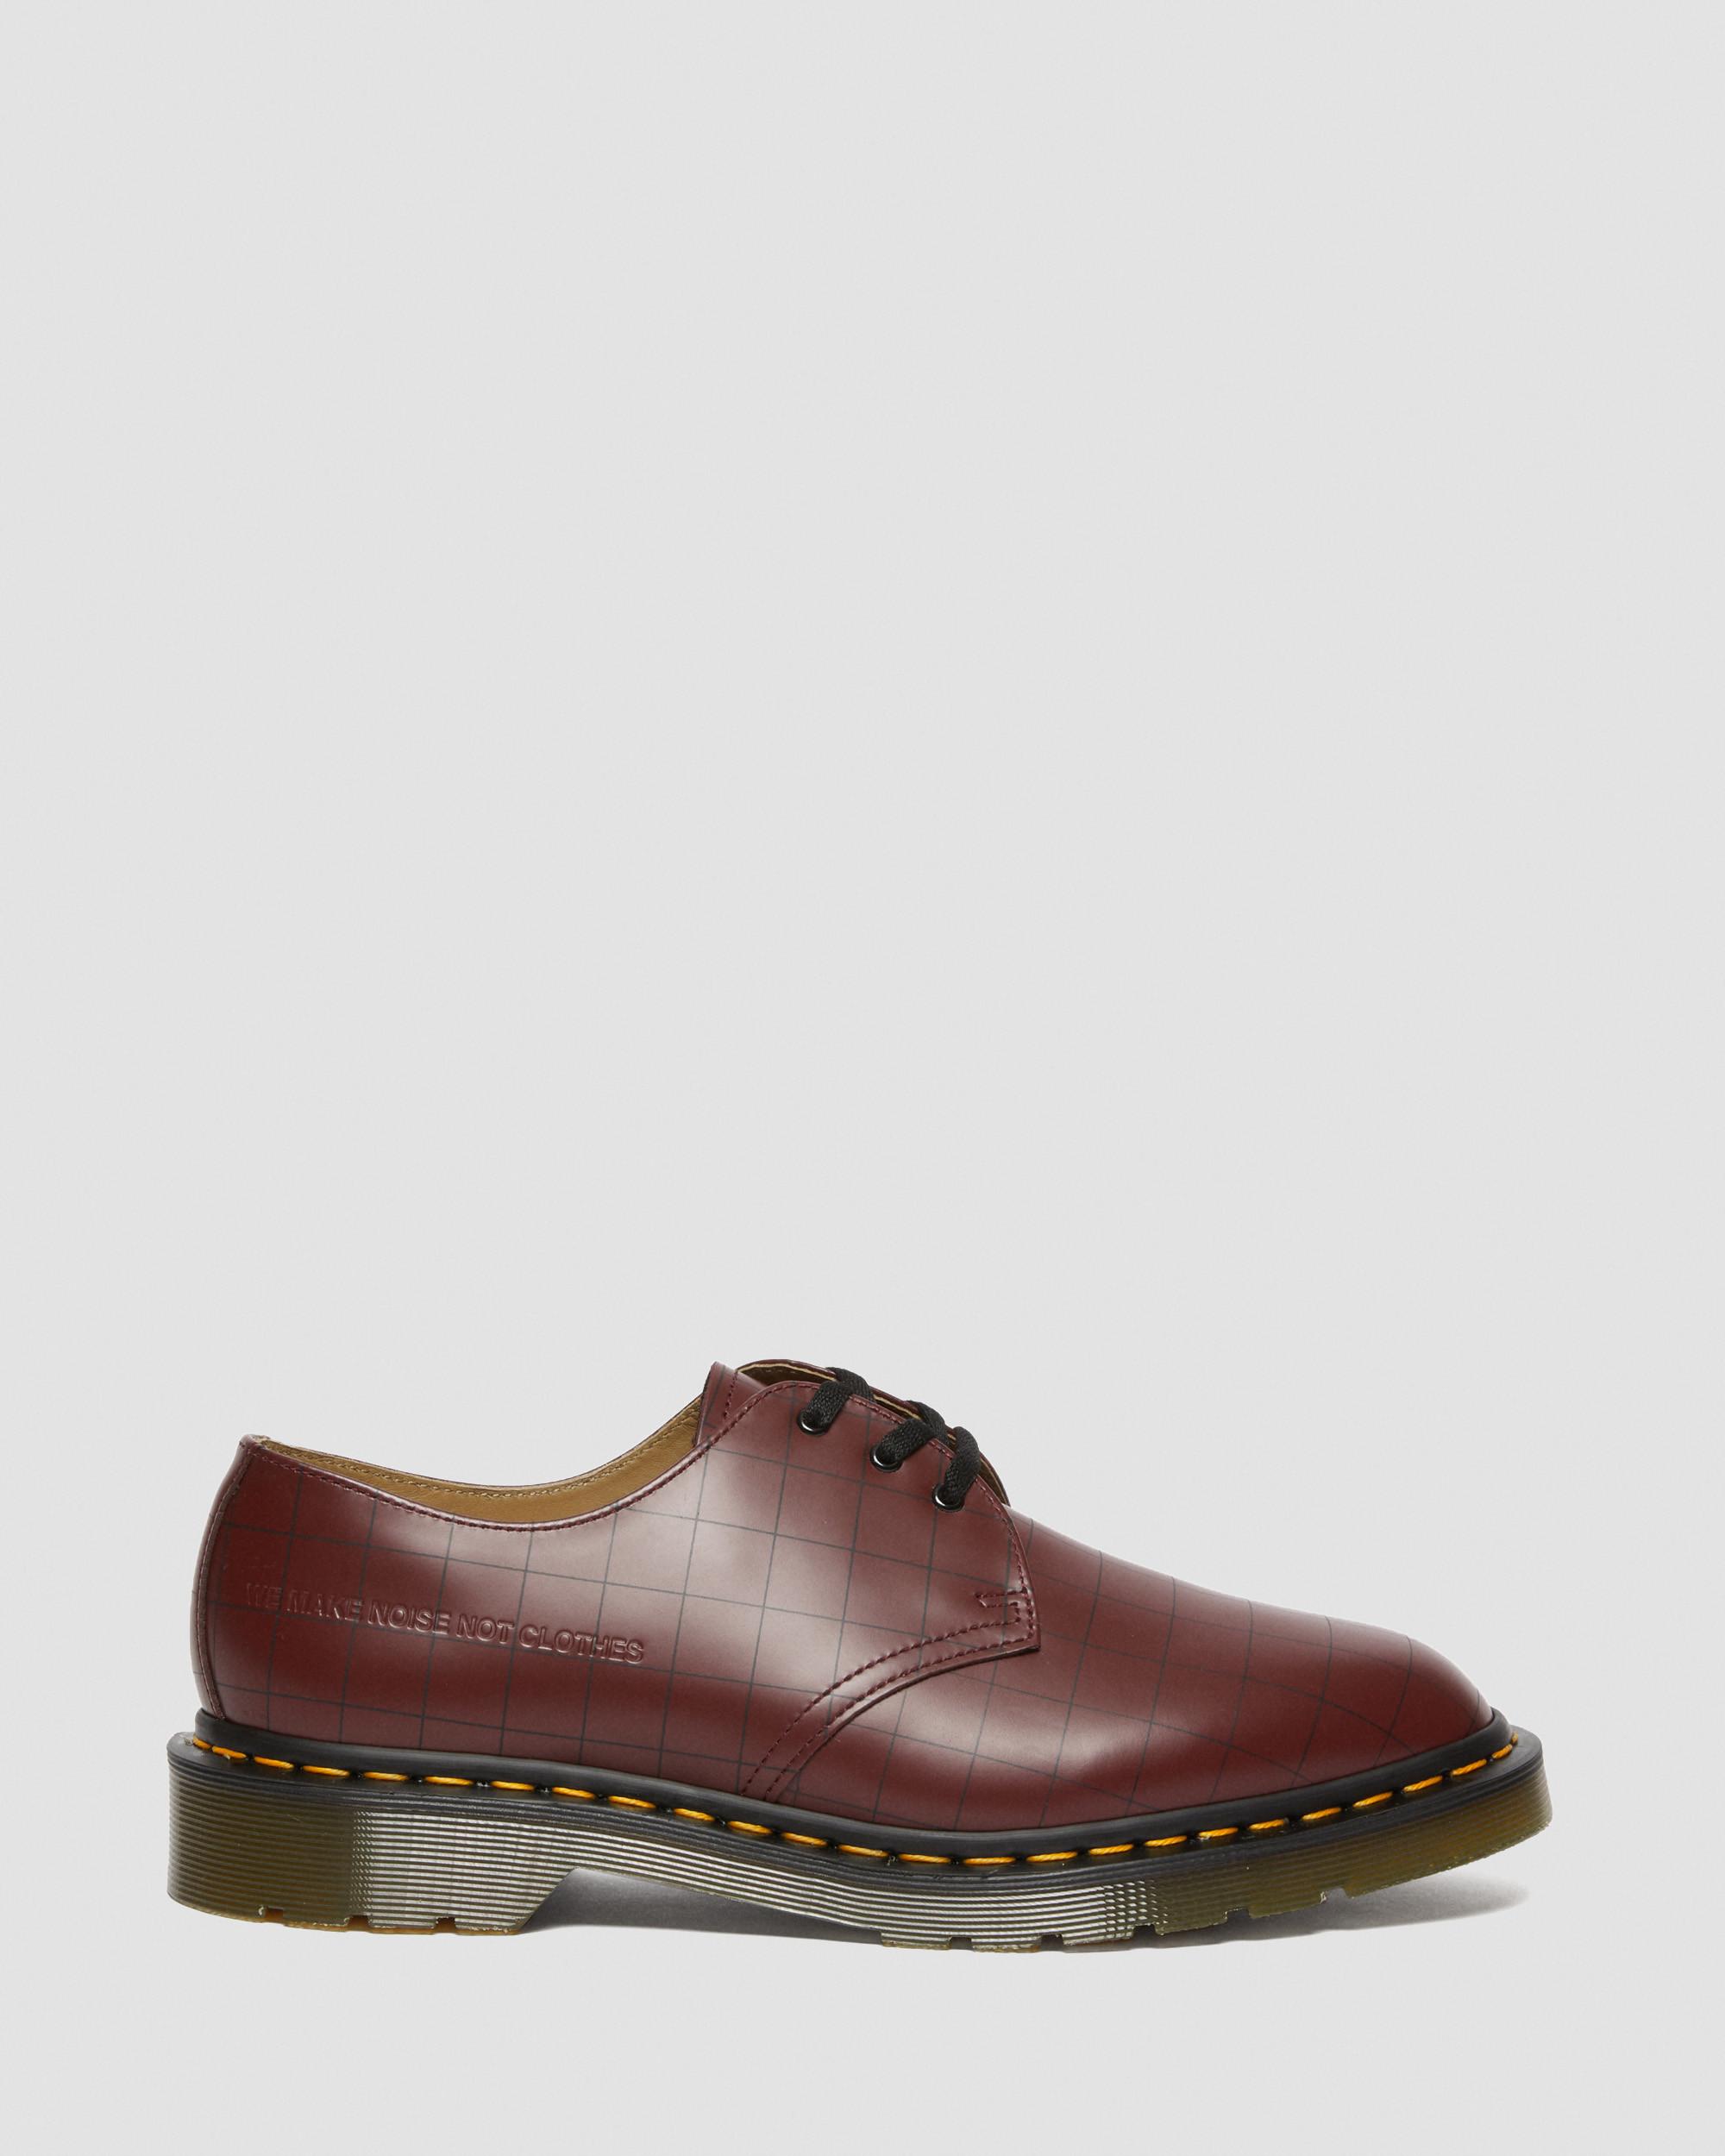 Chaussures 1461 Undercover en cuir SmoothChaussures 1461 Undercover en cuir Smooth Dr. Martens